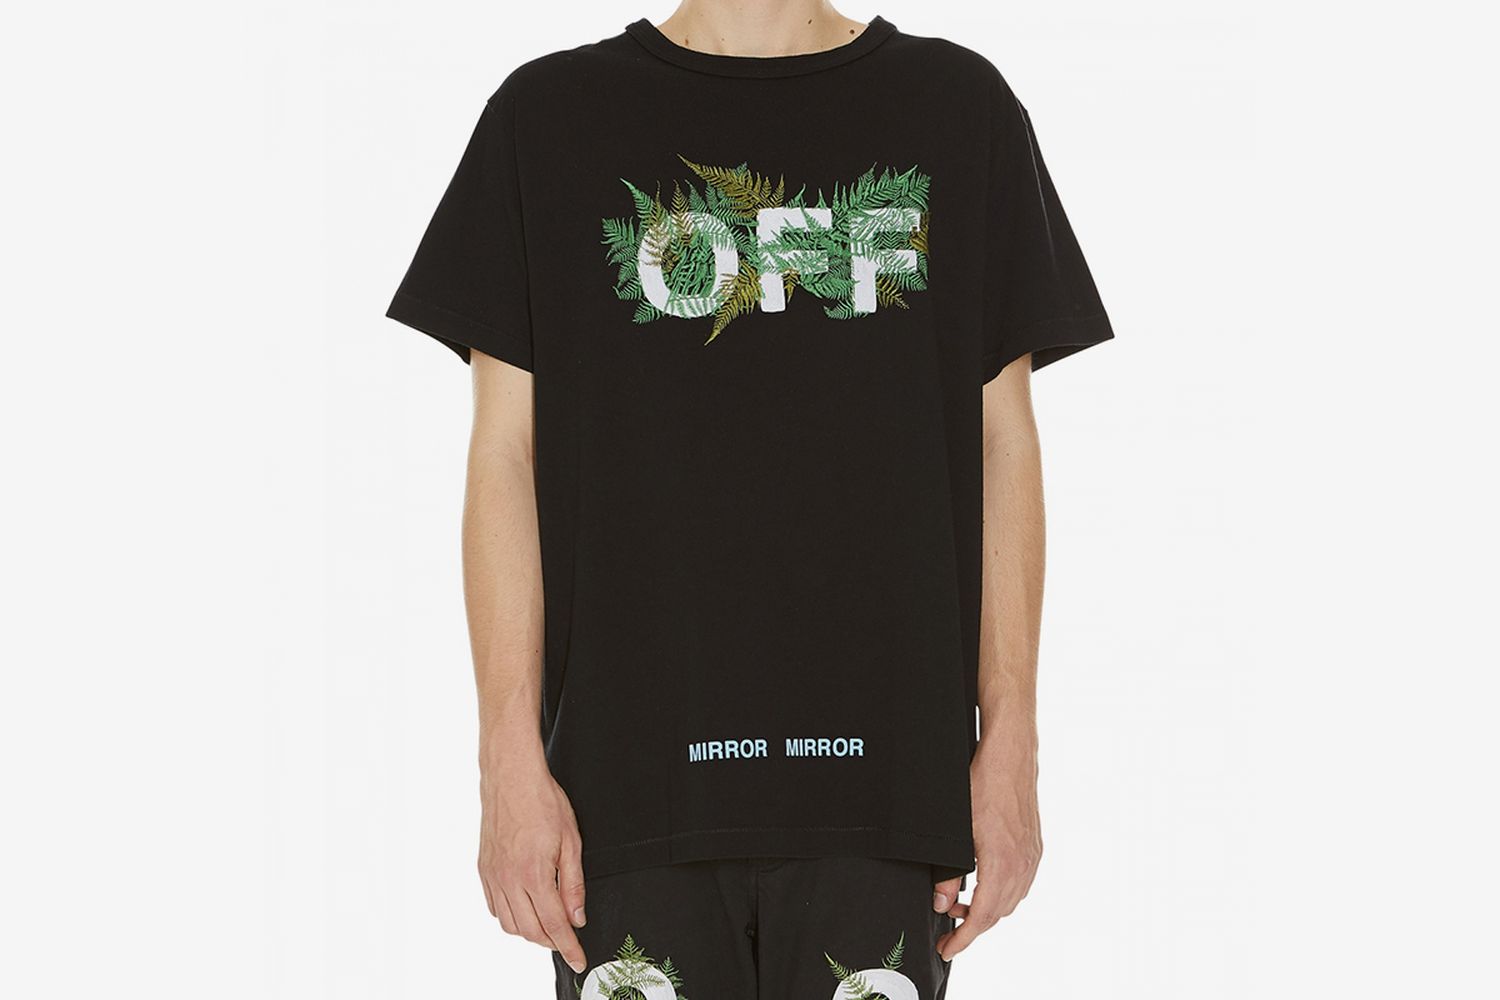 OFF-WHITE's Second Drop SS17 Has Arrived Fanfare